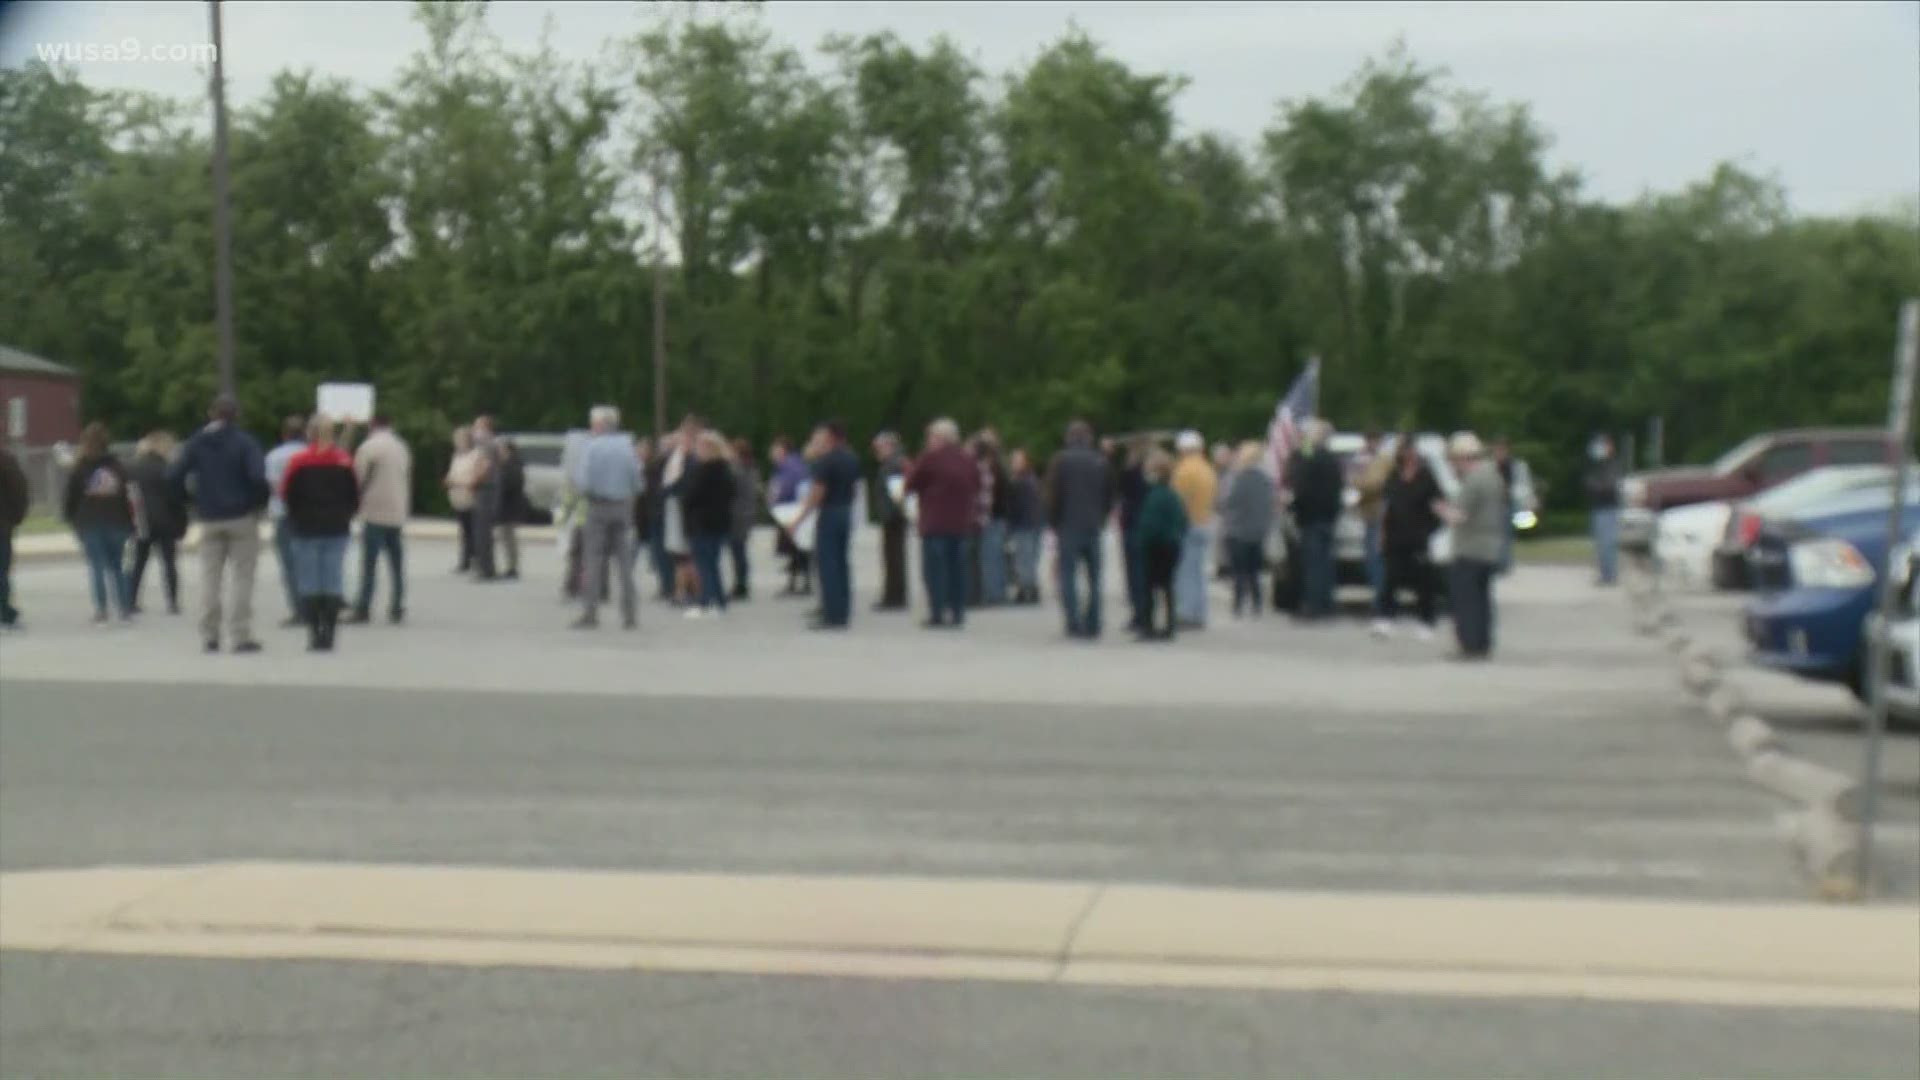 The La Plata rally attracted more than 100 people who want local government to allow businesses to open their doors before May 29.